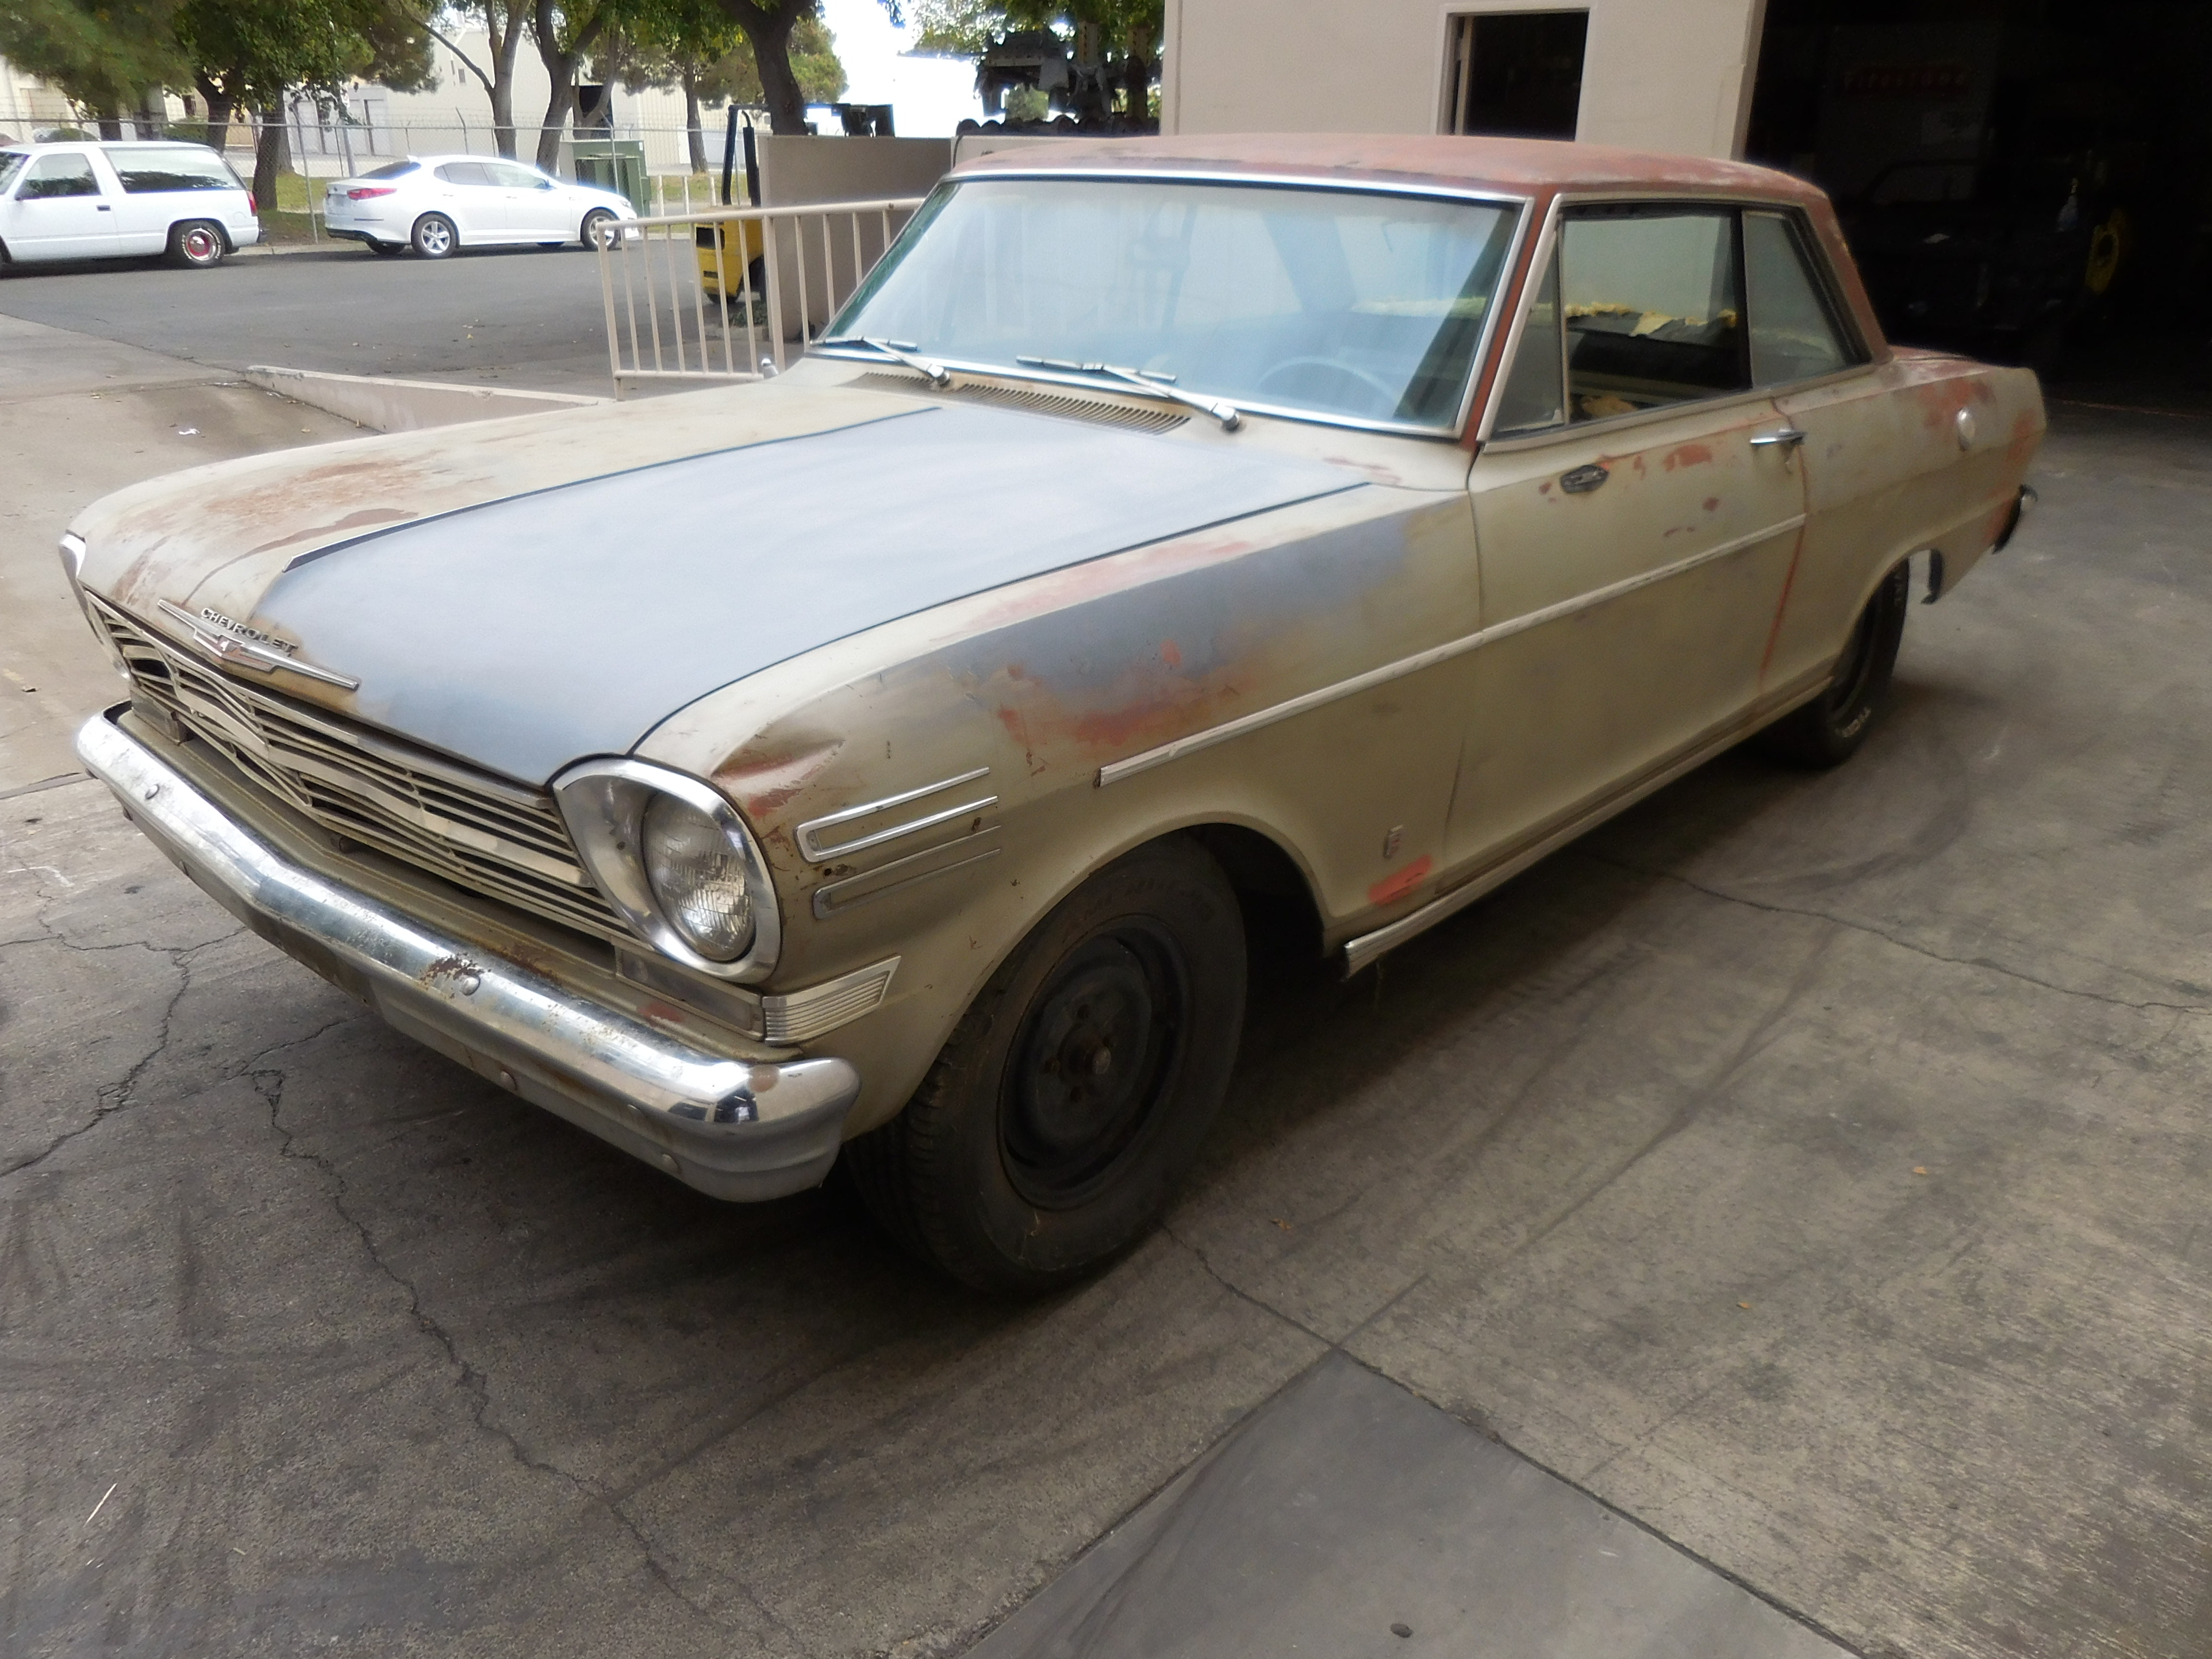 1962, Chevrolet, Nova, L6, AT, Rust, Free, Project, Car For Sale,car,for,sale,